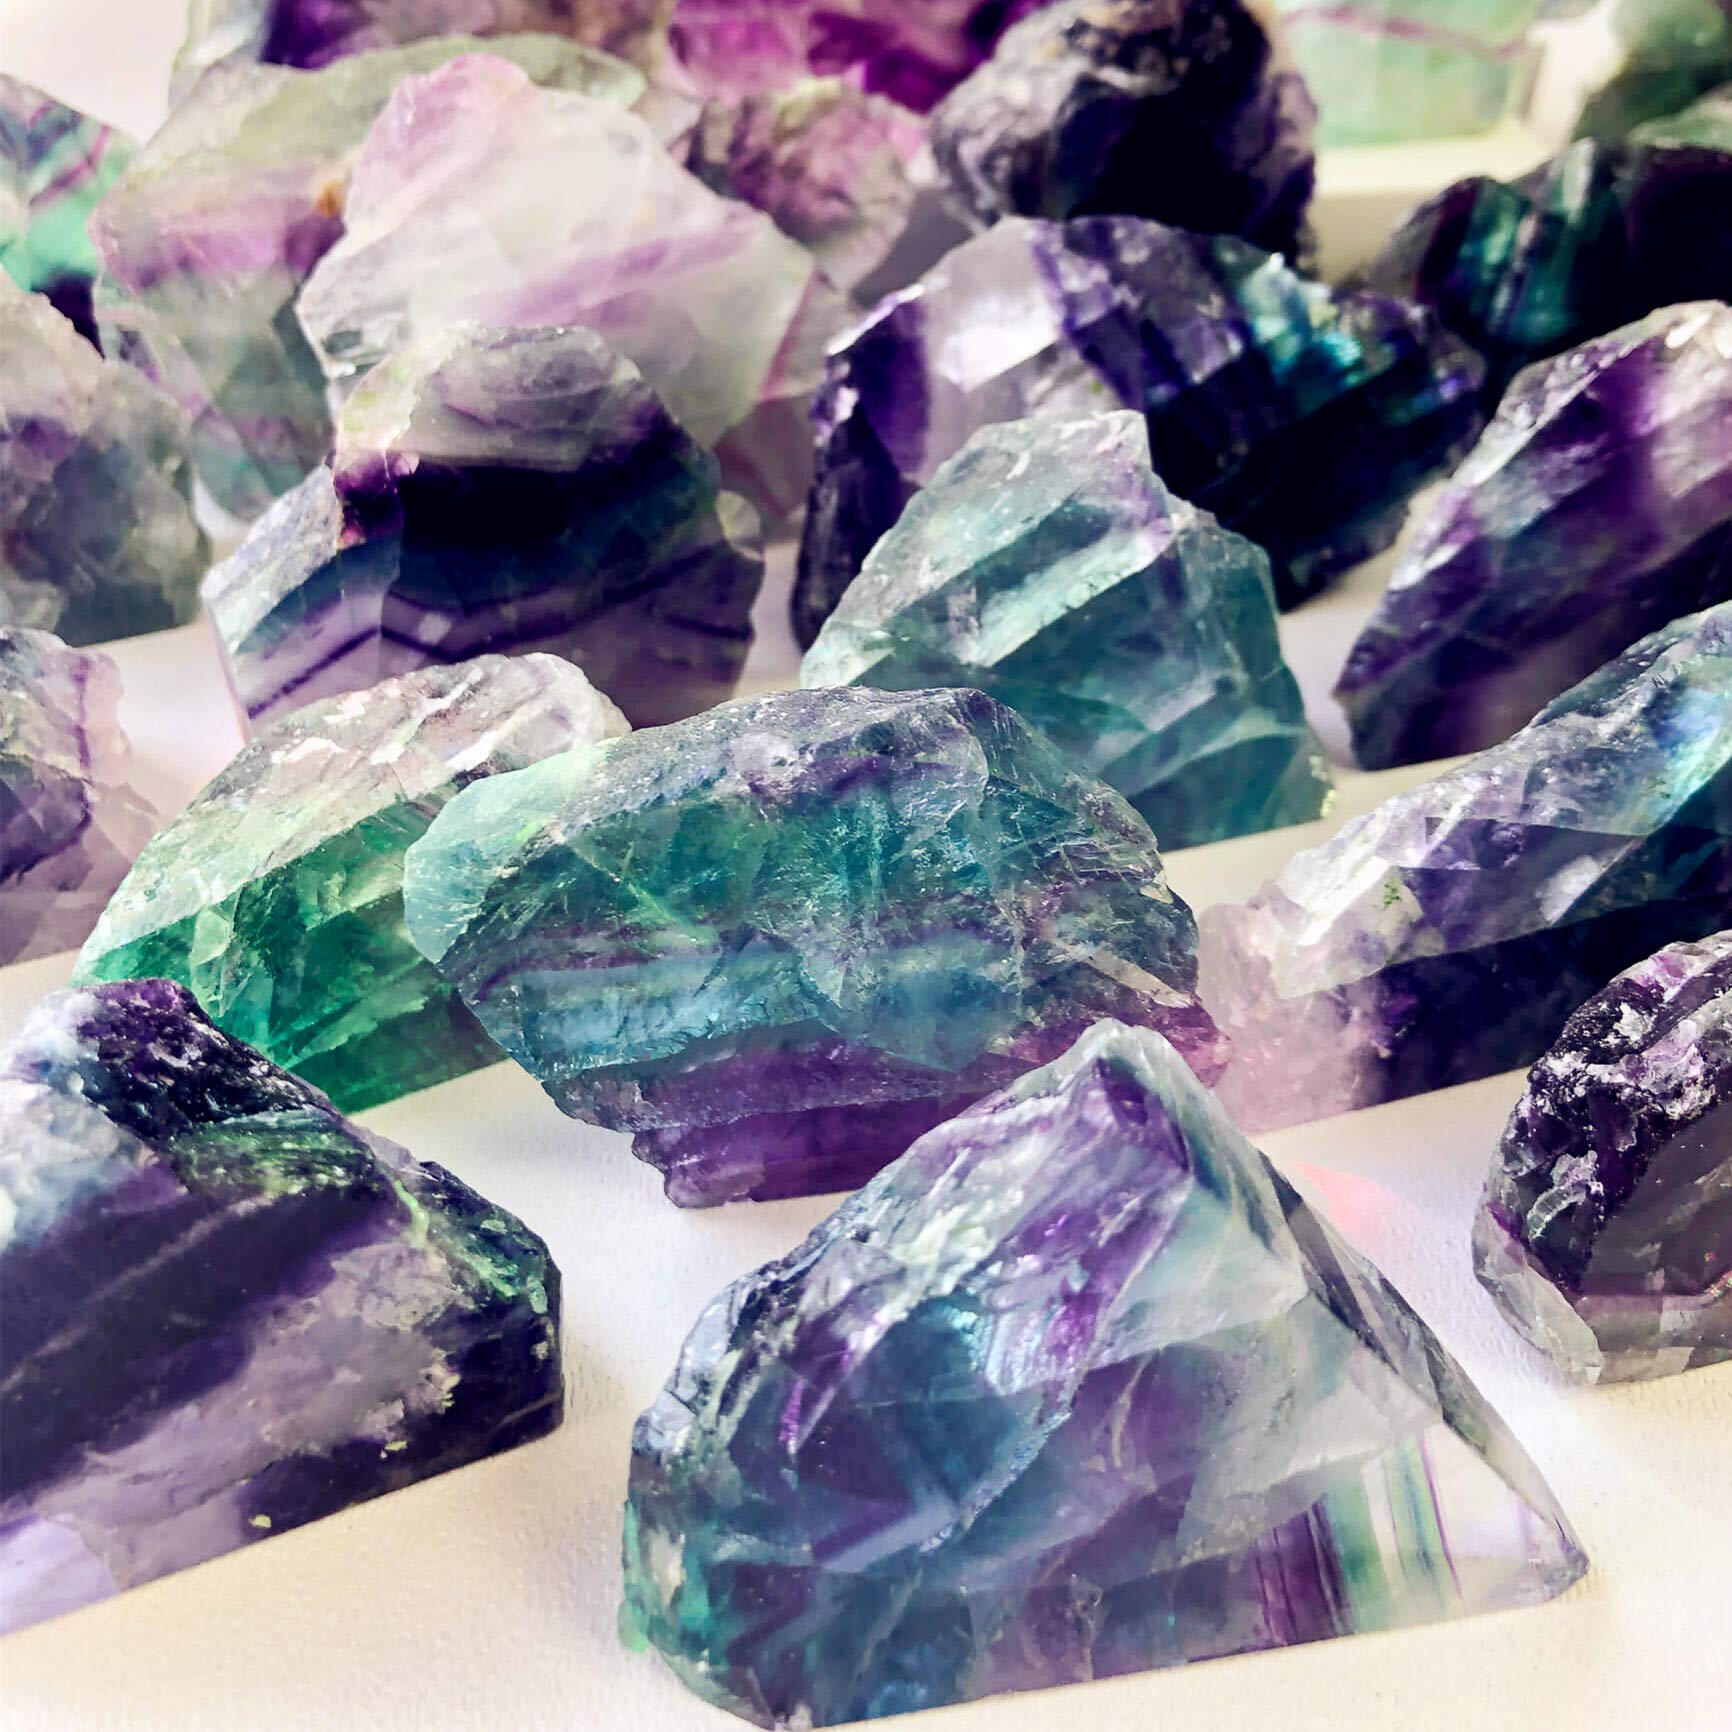 

Pendant Necklaces 1 Lb Large Rough Fluorite Stone Crystal Natural Rainbow Purple Green Mineral Specimen Gemstone Healing Crystals And S amHrZ